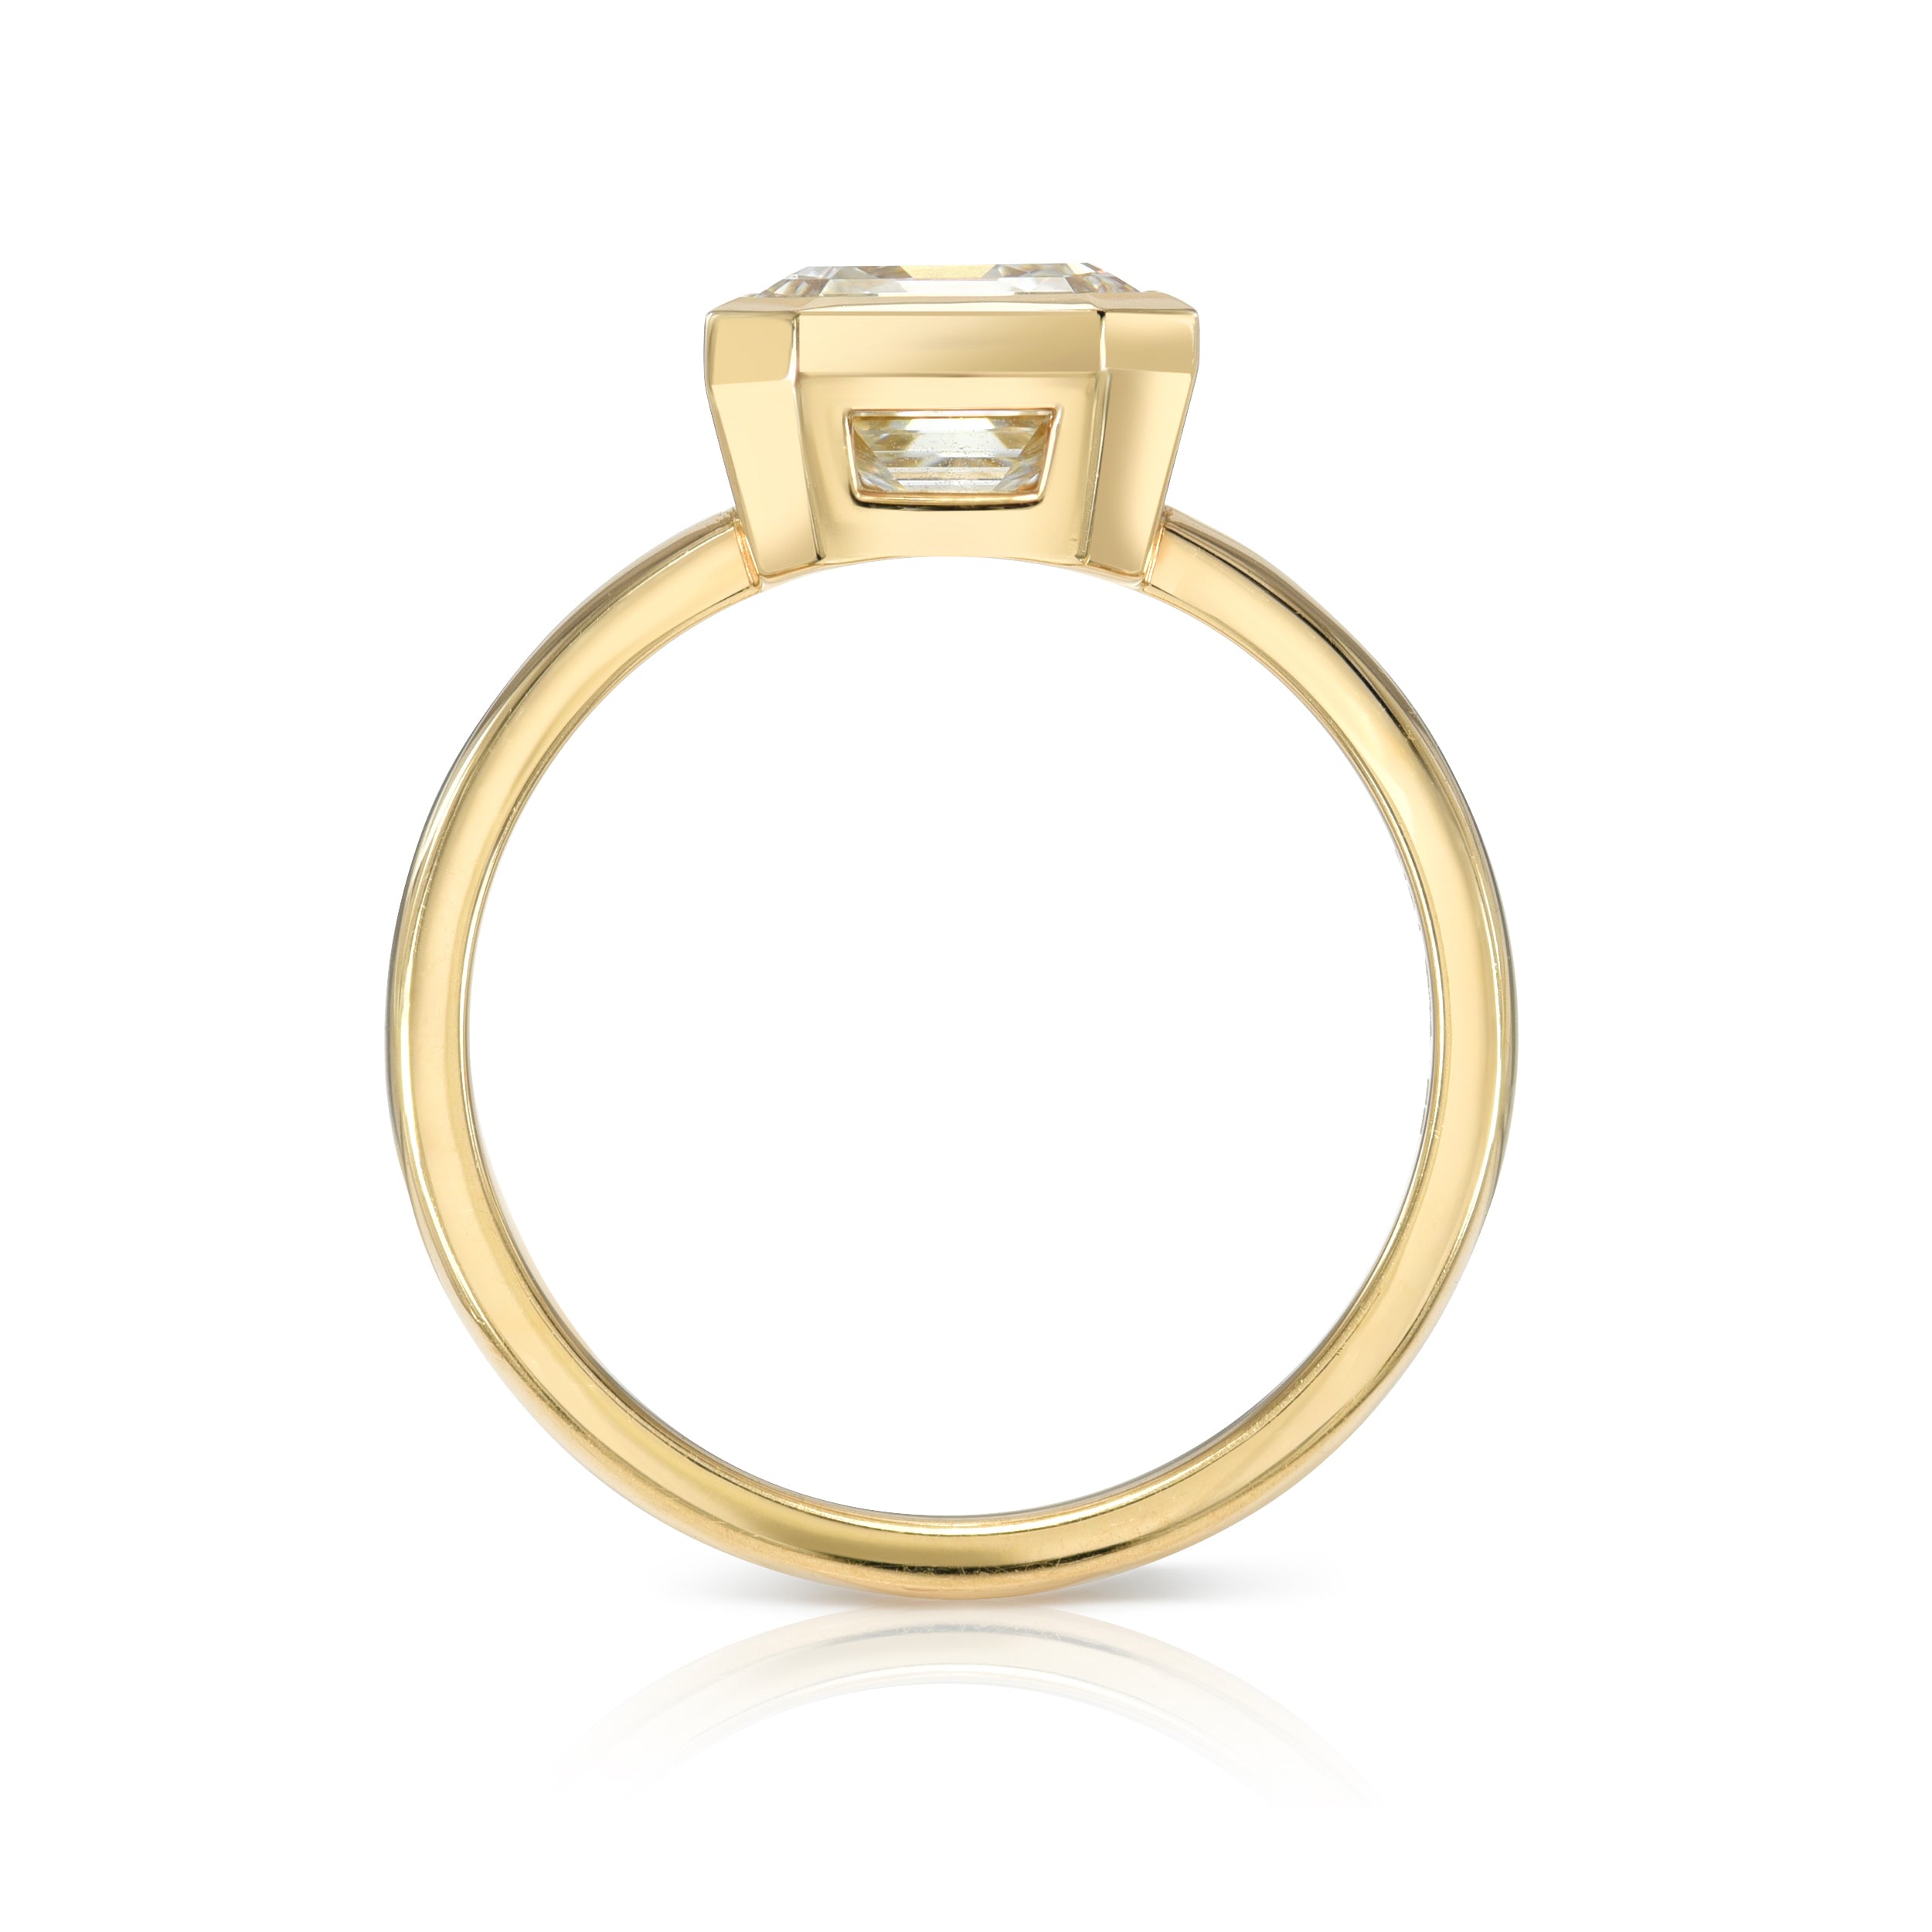 SINGLE STONE WYLER RING featuring 2.12ct L/VVS2 GIA certified Asscher cut diamond bezel set in a handcrafted 18K yellow gold mounting.